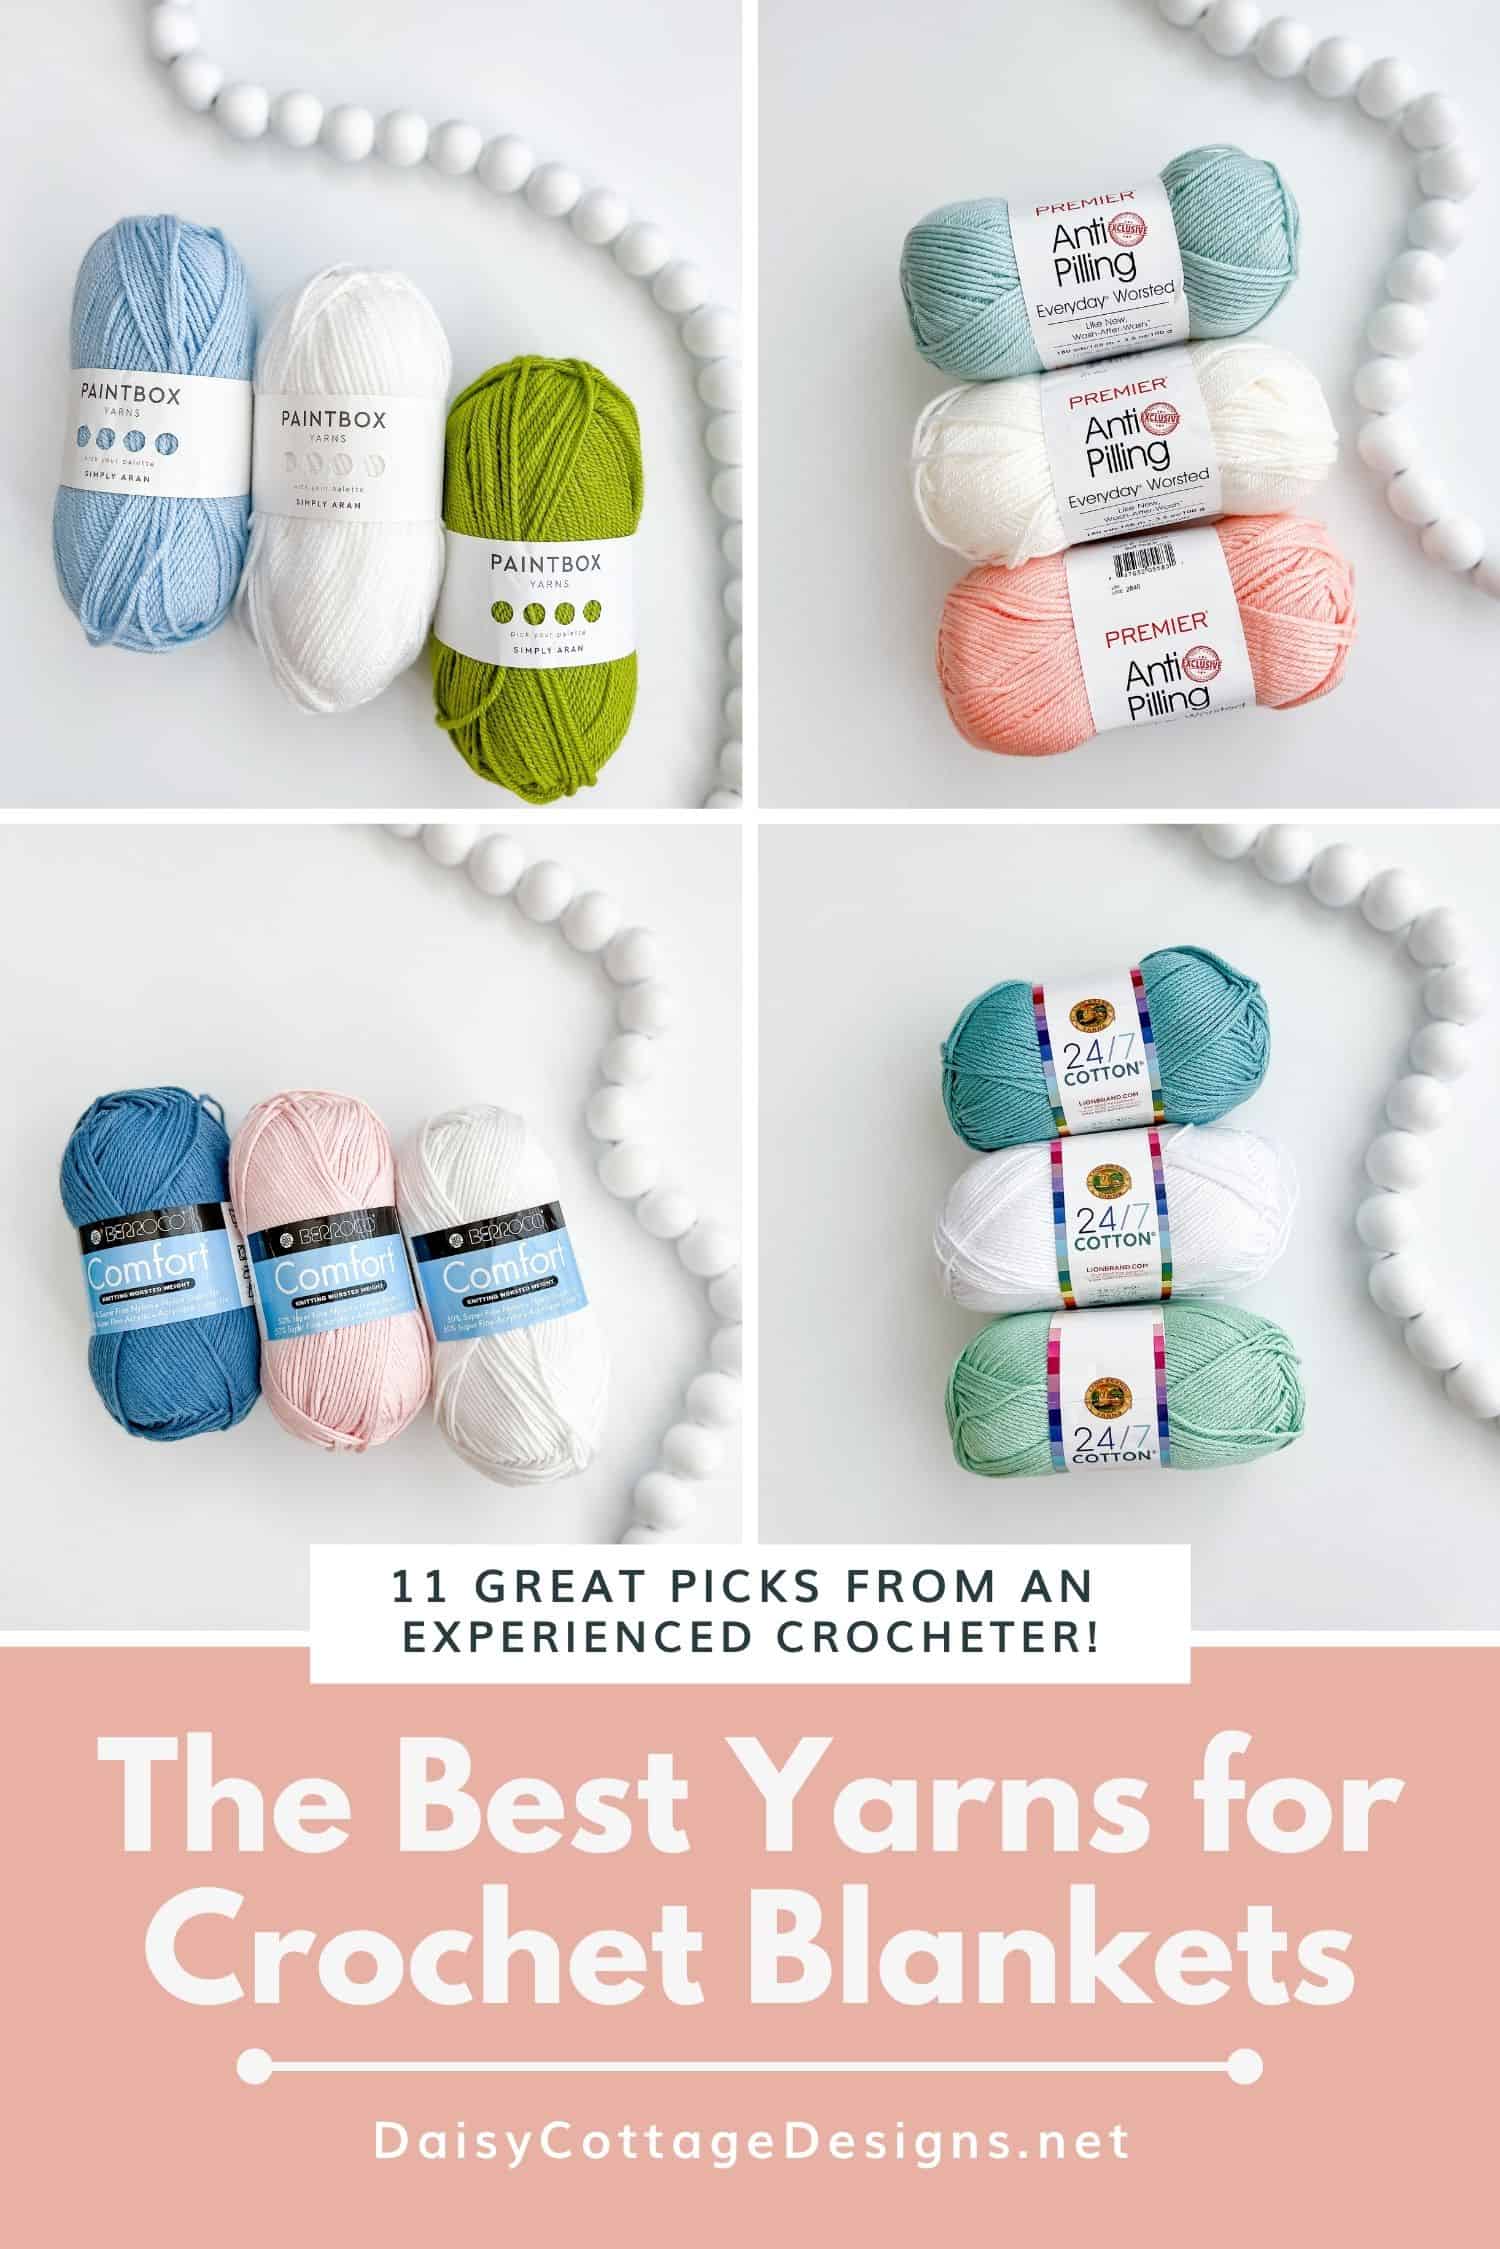 If you've ever looked for the best yarn for a crochet blanket, you've found that the options are almost endless. So what's the best yarn for a crocheted blanket? 